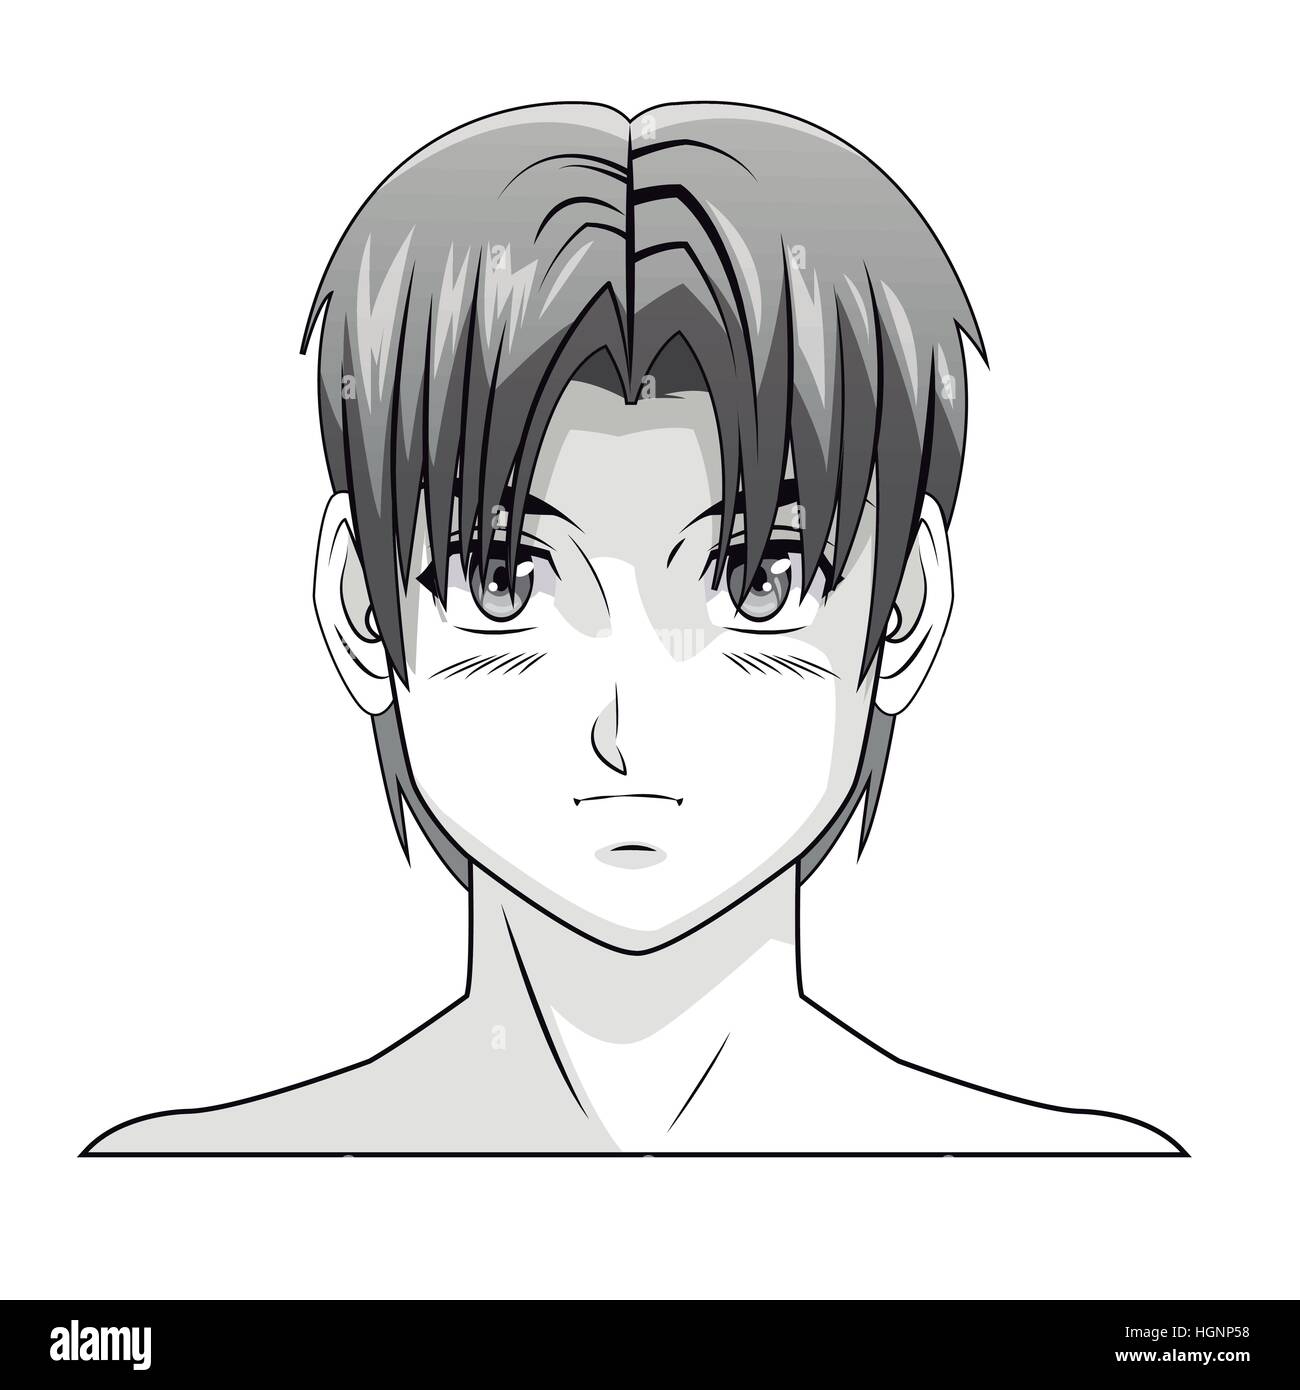 How To Draw A Manga / Anime Styled Portrait: Male Edition